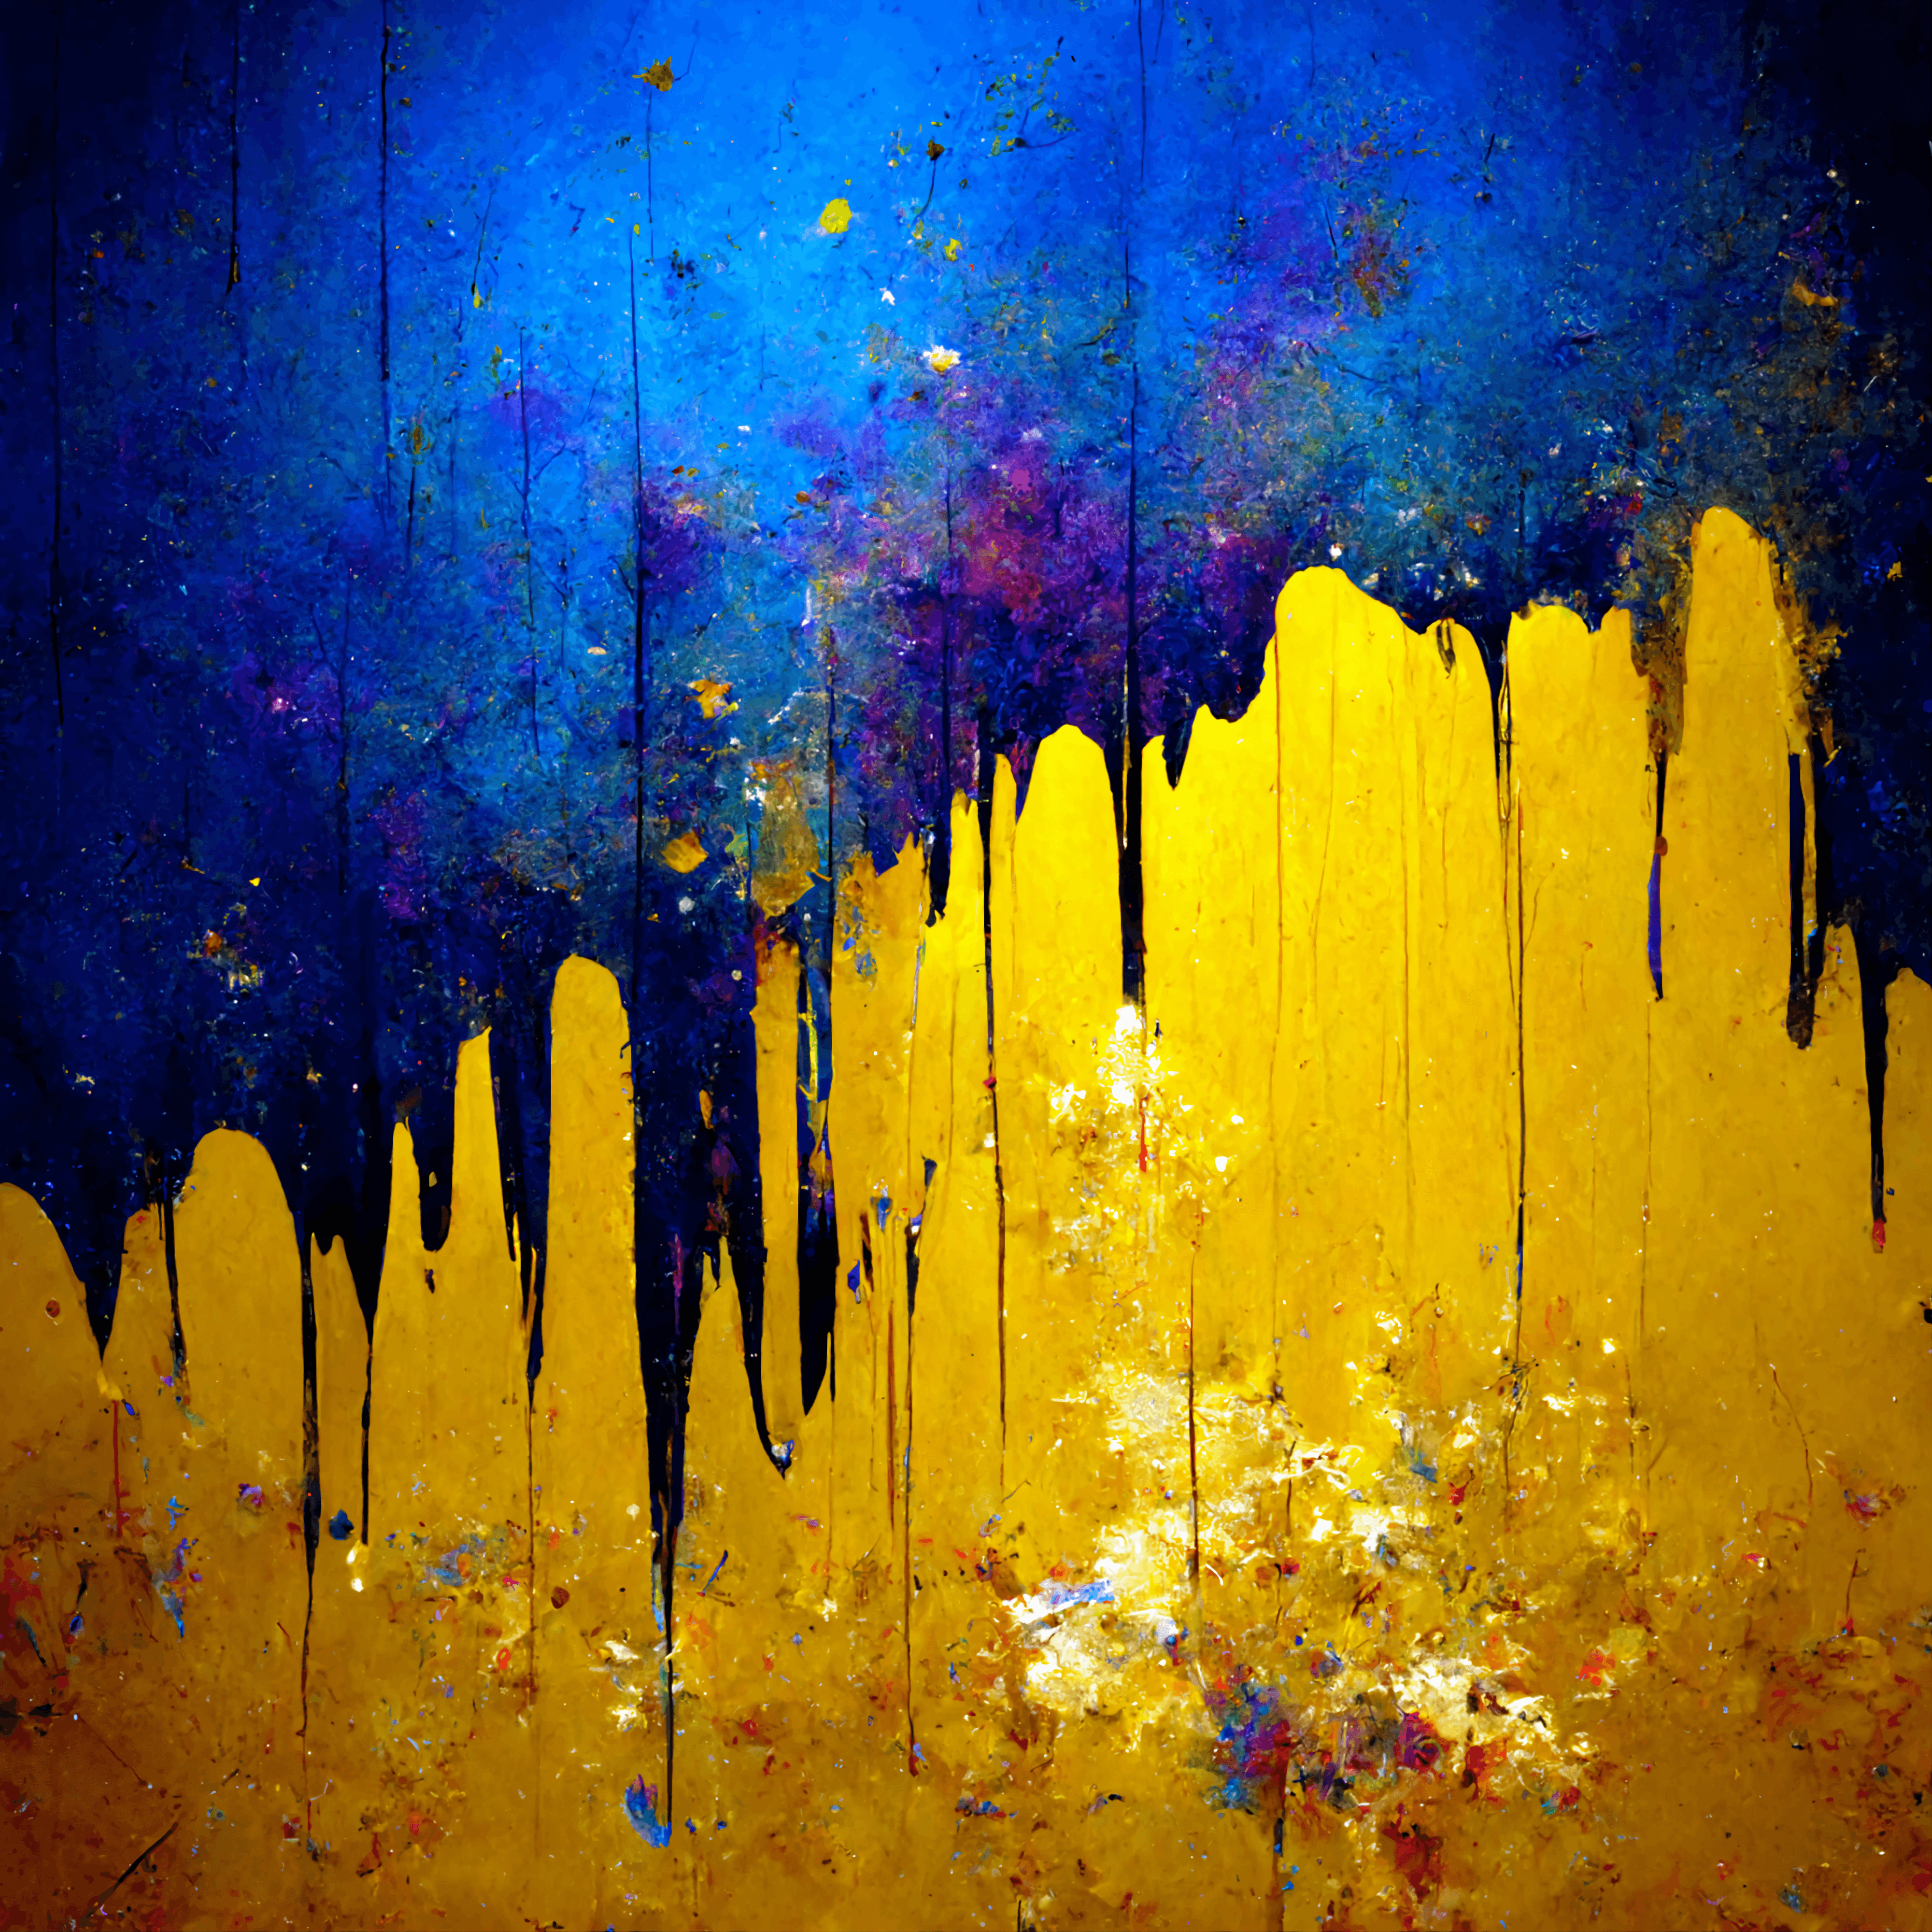 Blue and yellow with drips